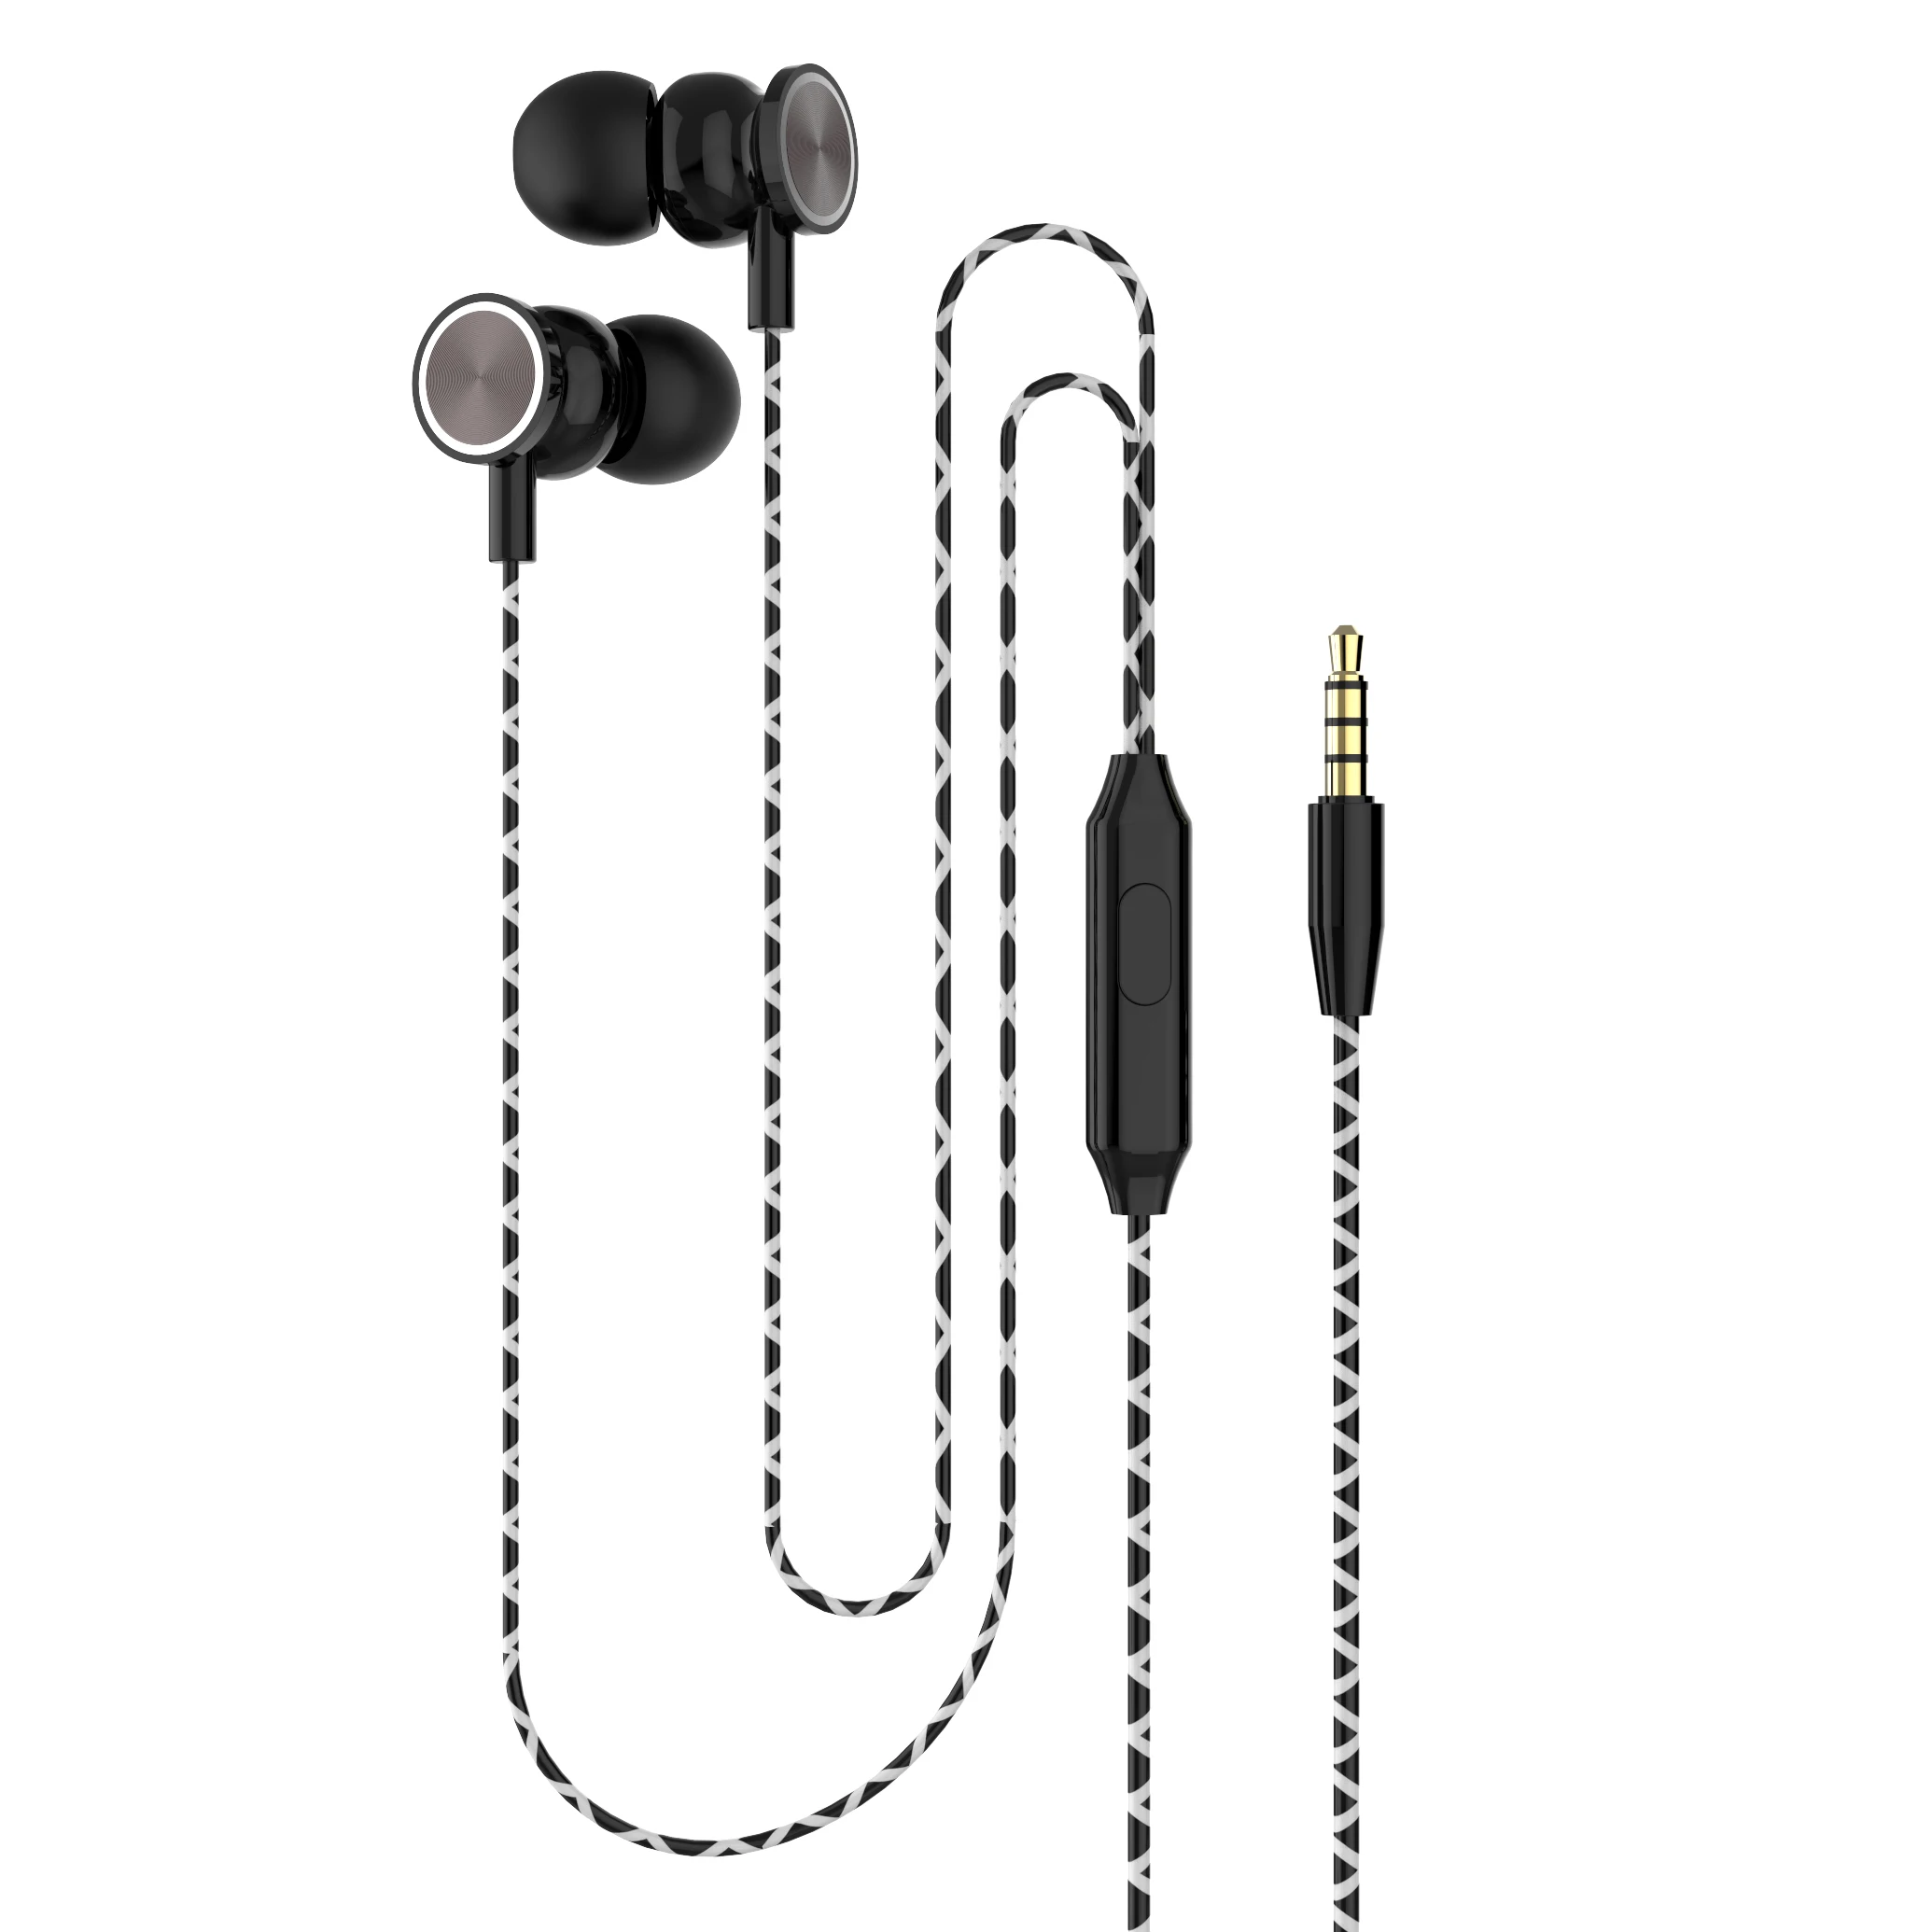 

Adjustable Volume BASS Wired Earphone with Mic In Ear HIFI Wired Earphone 3.5mm High Fidelity Sound Quality Y03, 4 colors